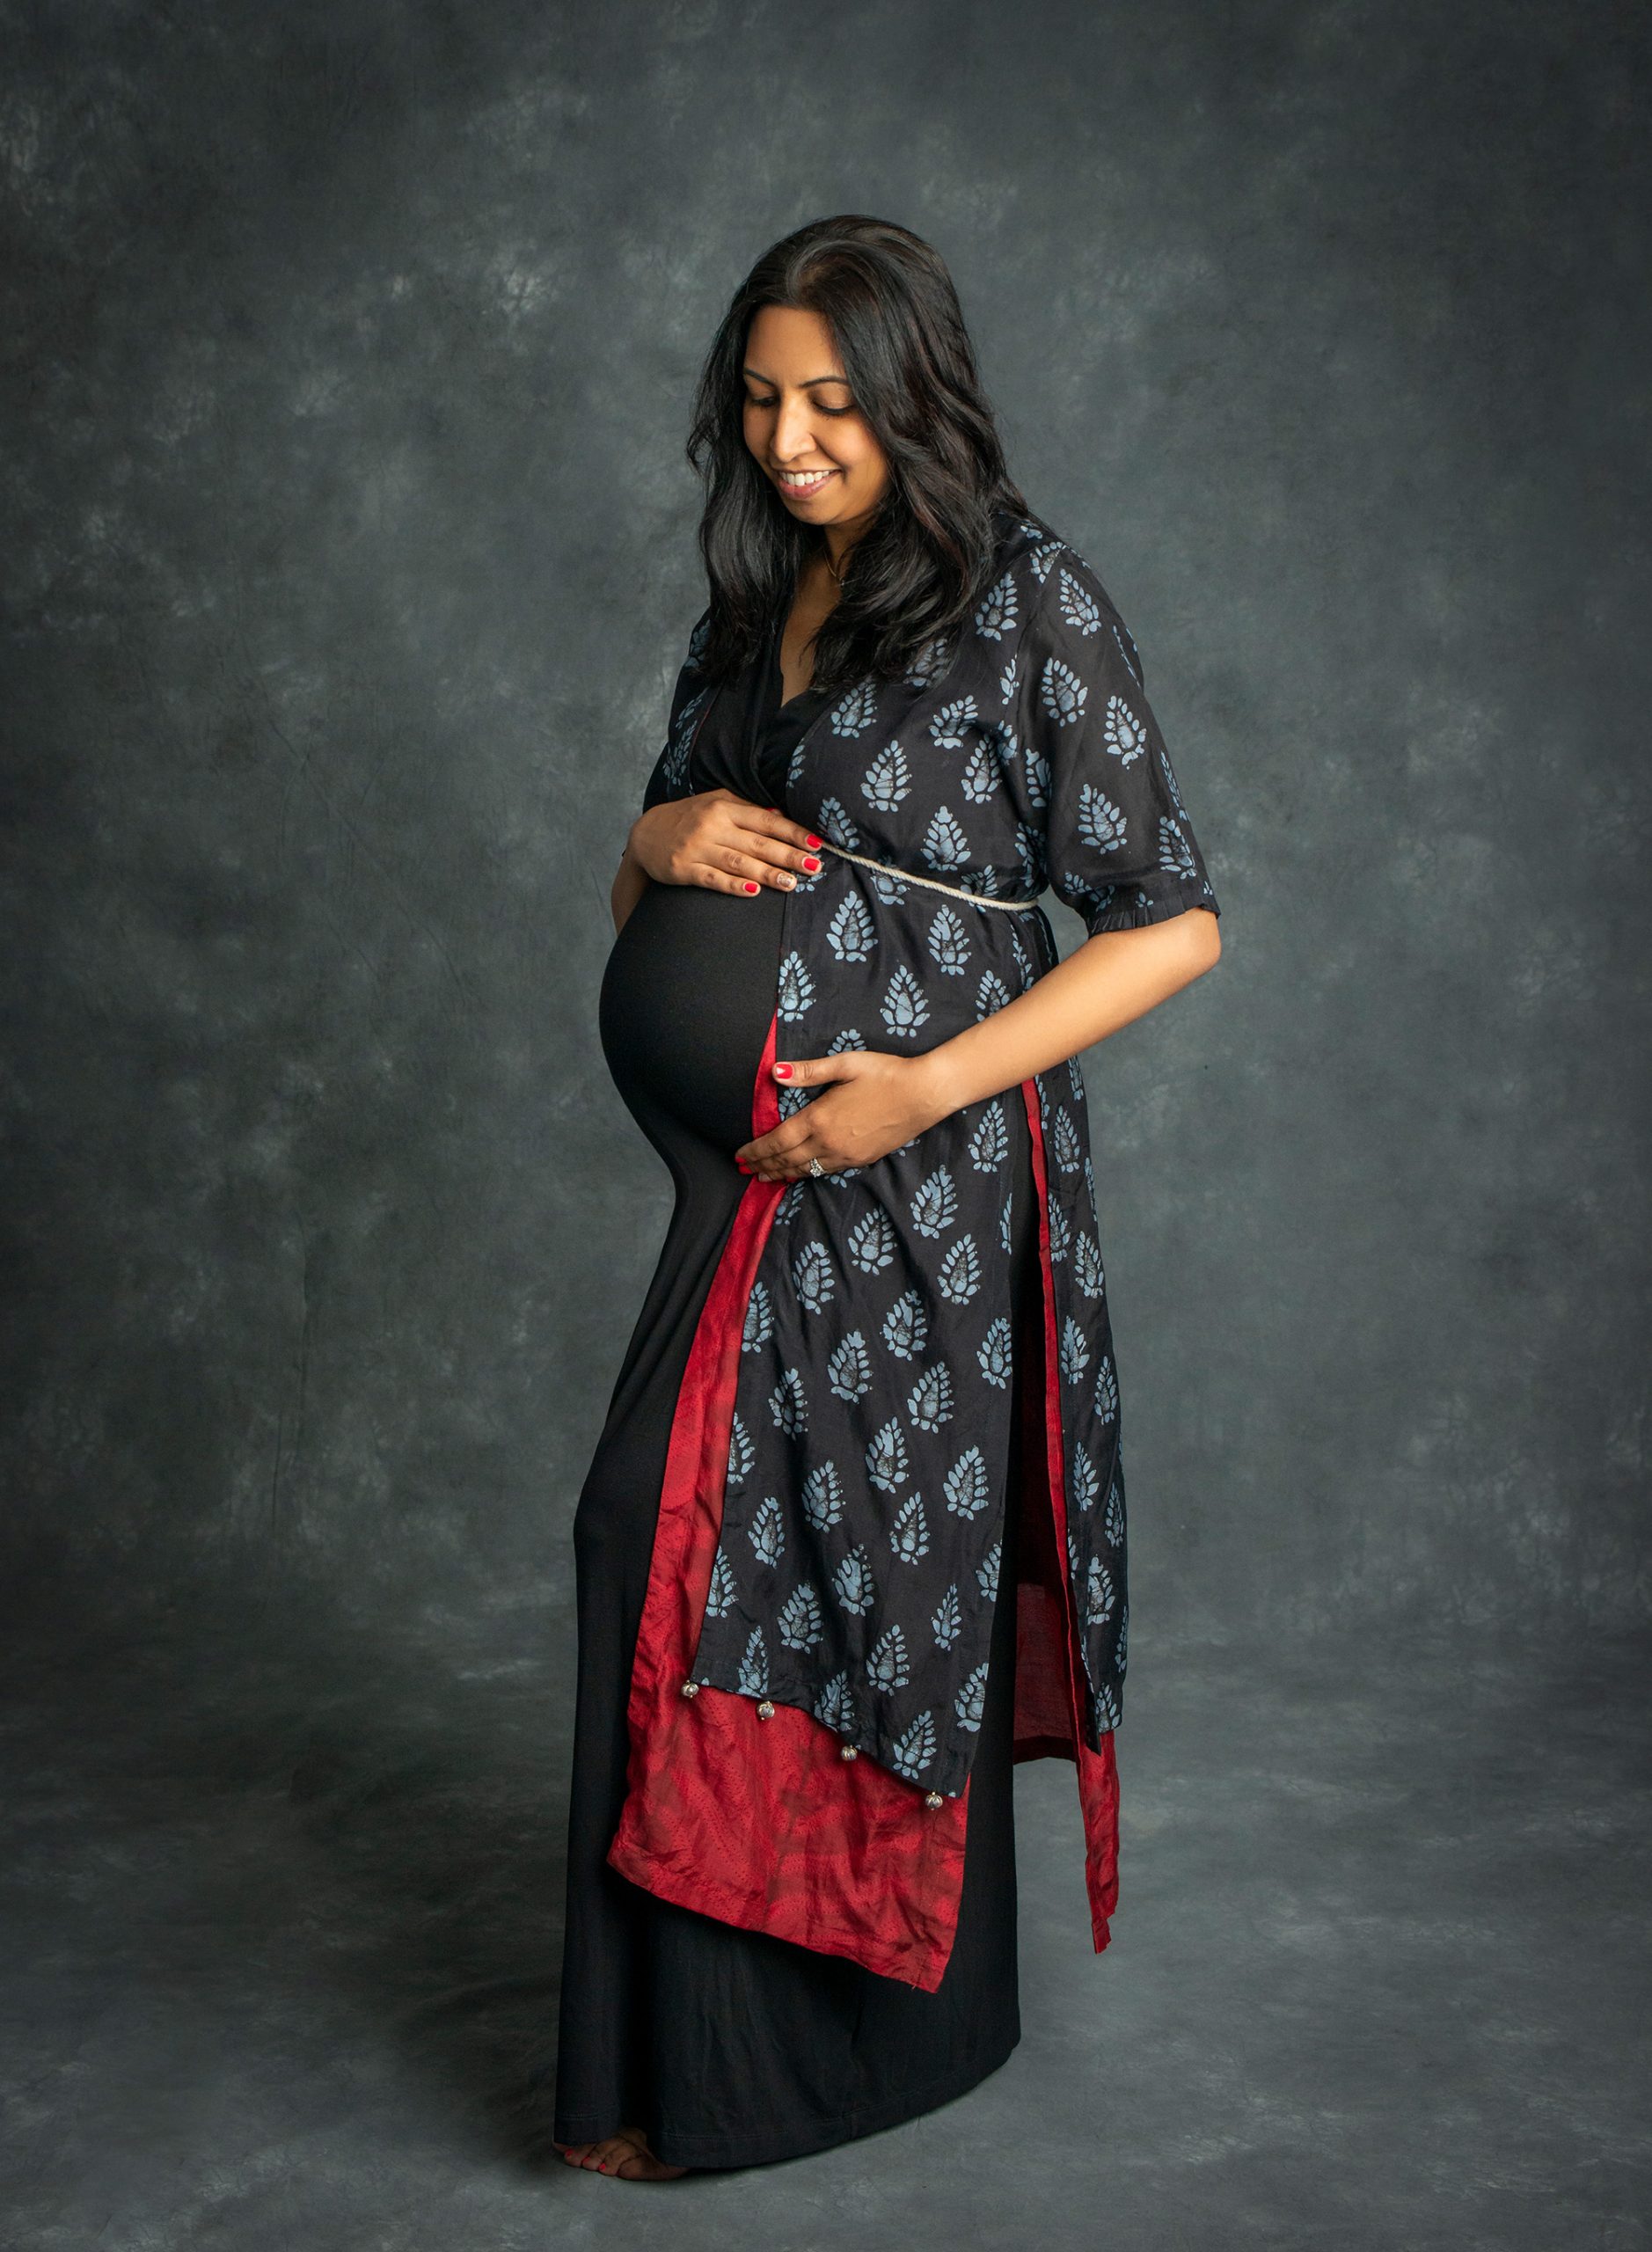 pregnant woman holding stomach posing in black dress